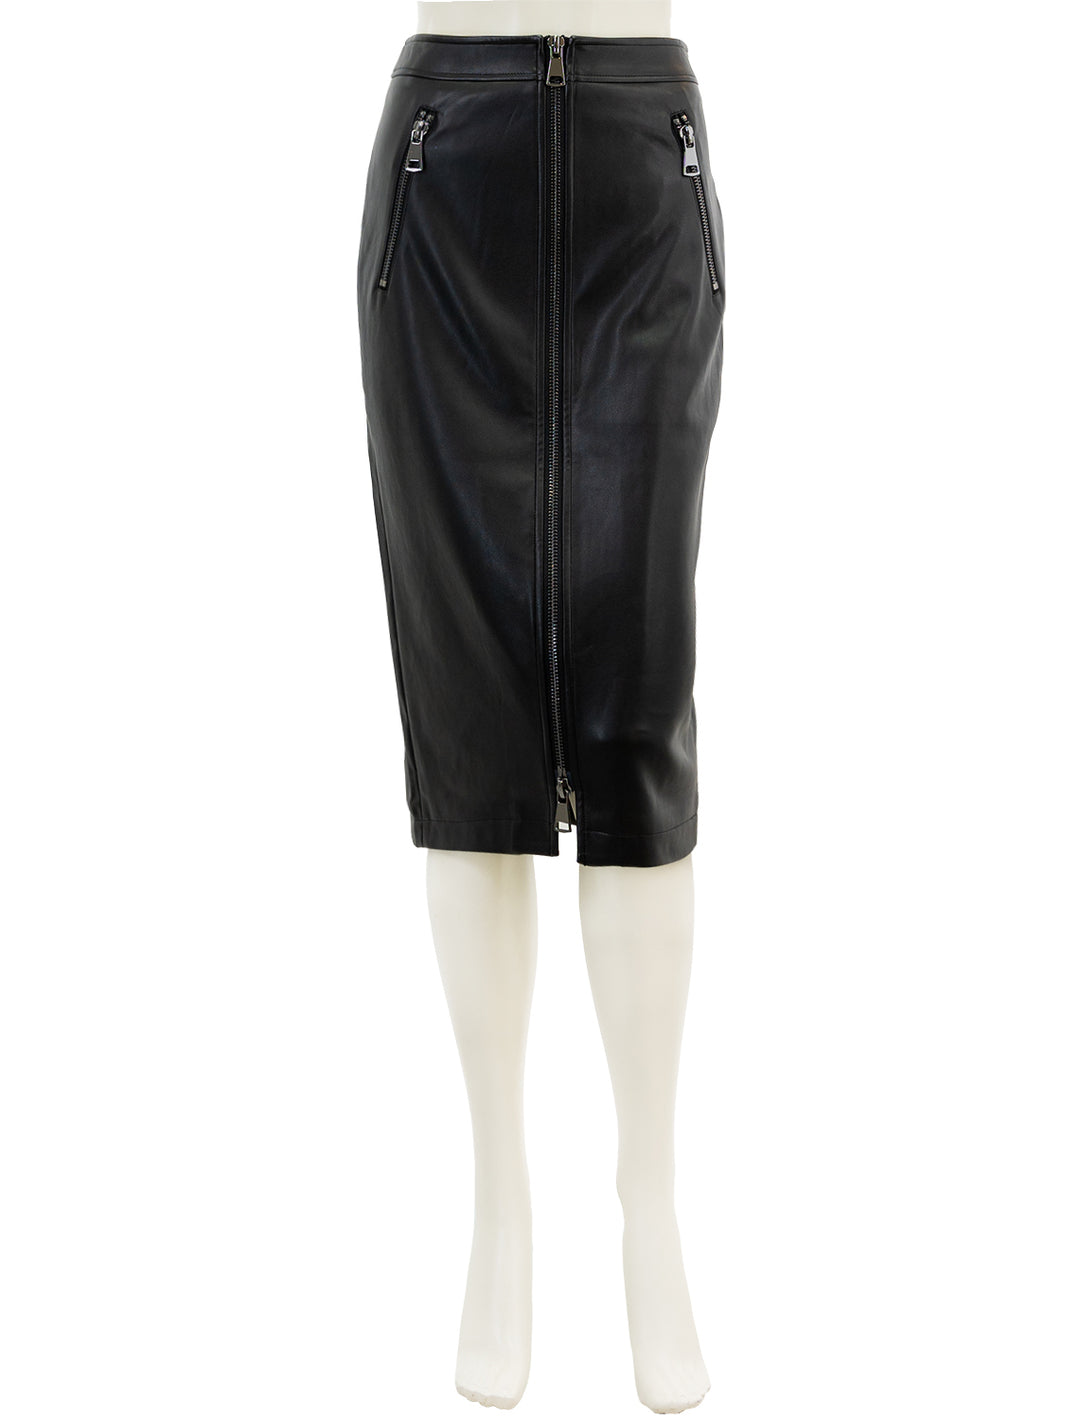 Front view of Essentiel Antwerp's encourage faux leather skirt in black.